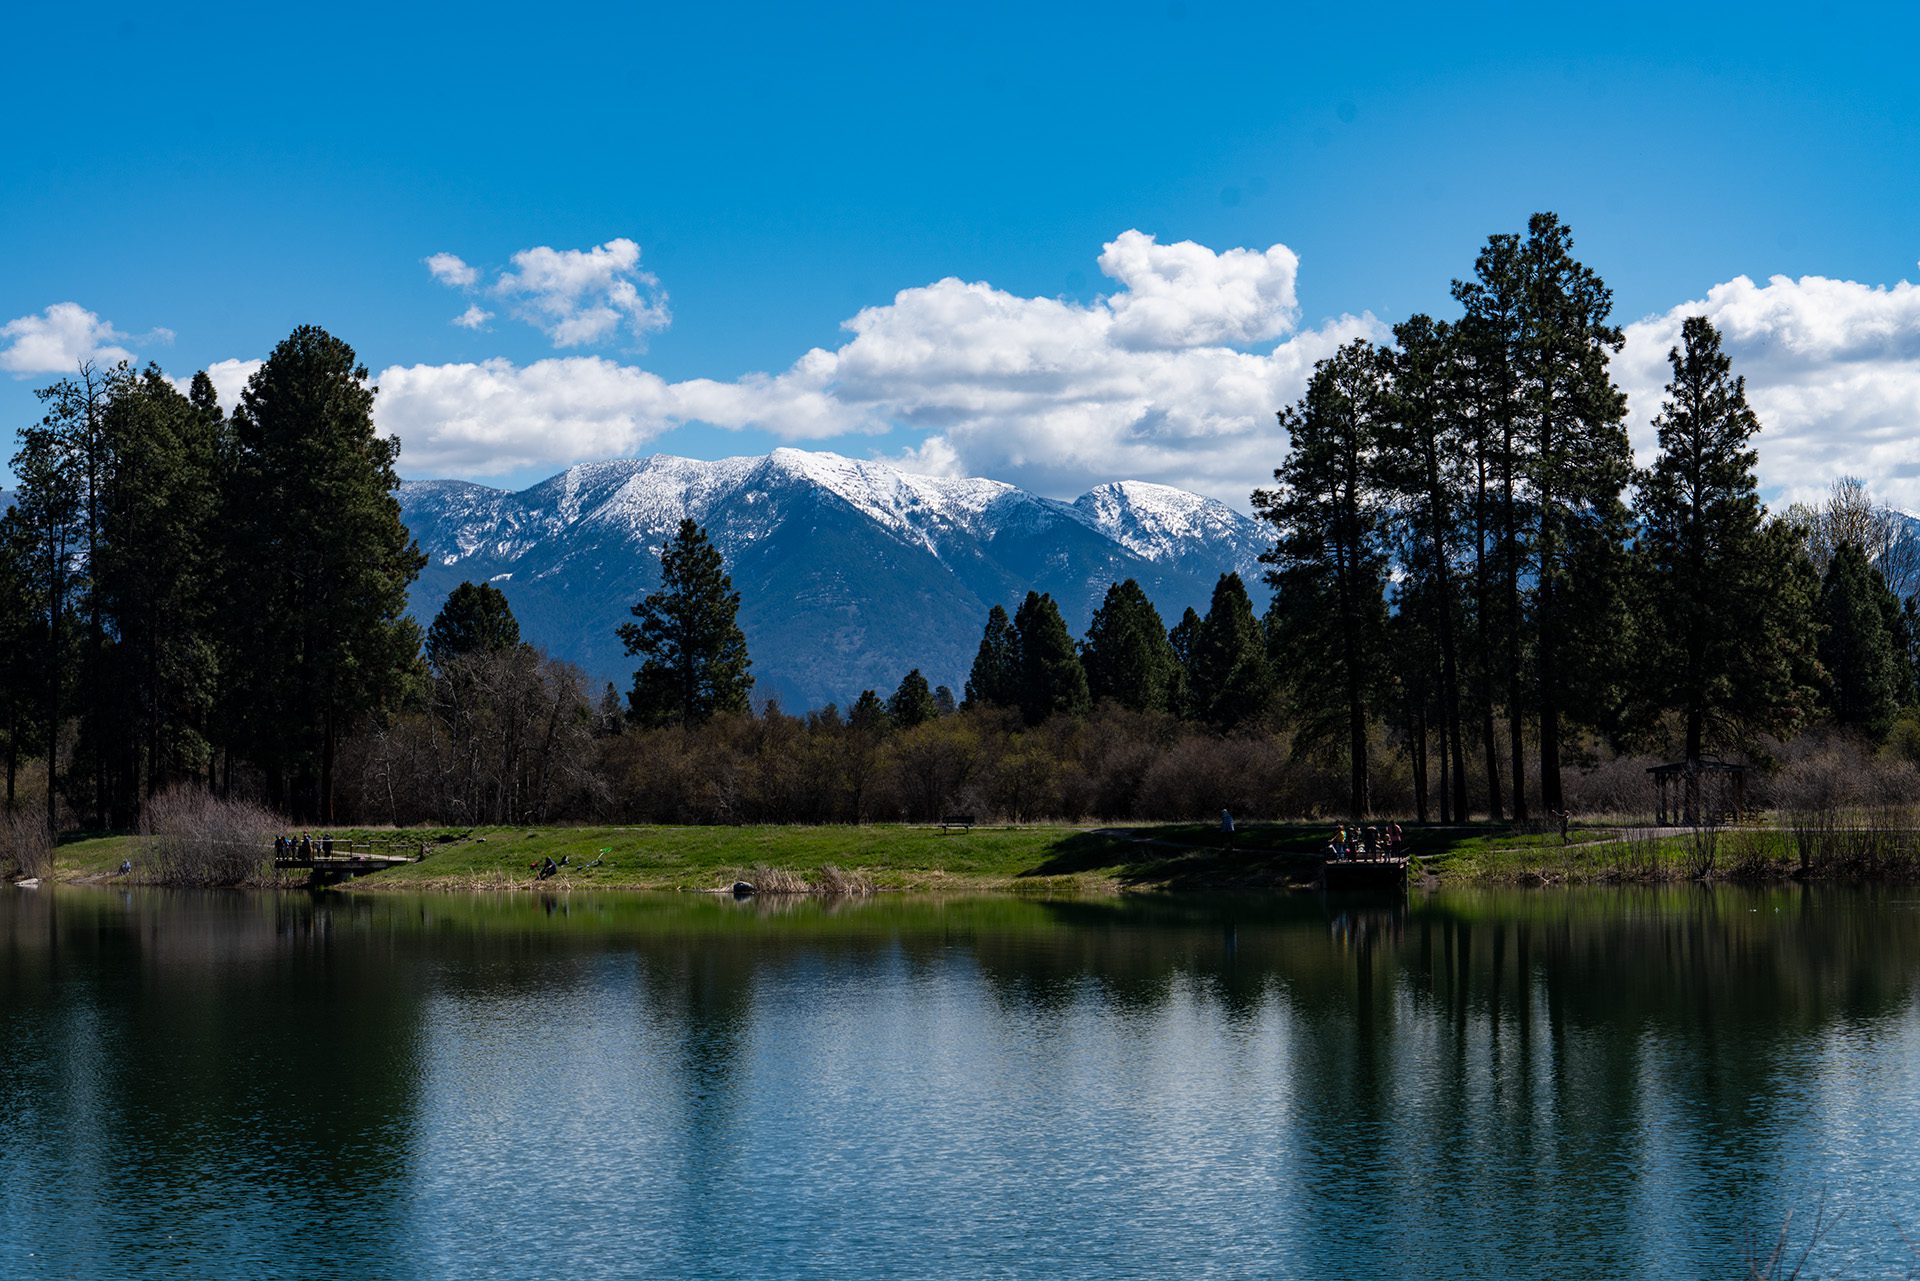 Spring in the Flathead Valley